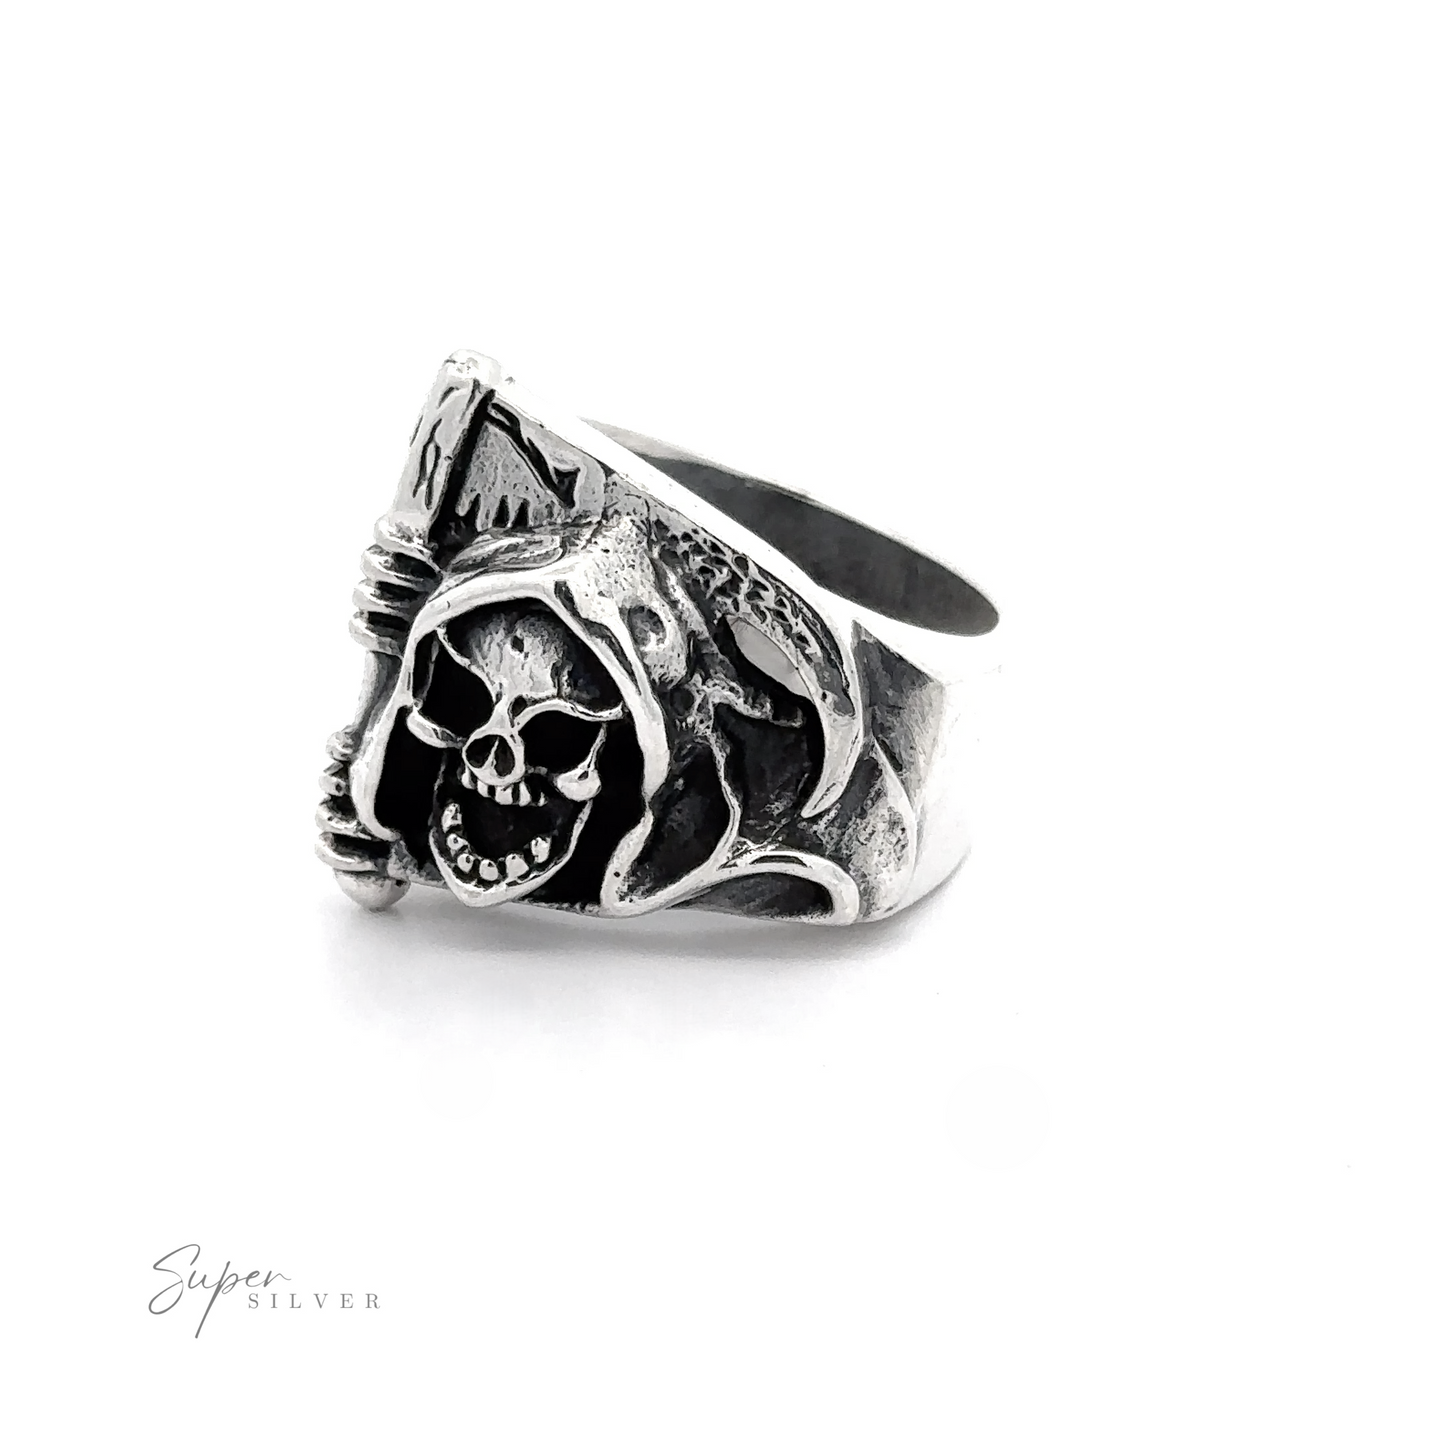 A sterling silver ring featuring a detailed skull with a hood and scythe design, set against a white background, this Grim Reaper With Scythe Ring makes for an unmistakable statement piece.